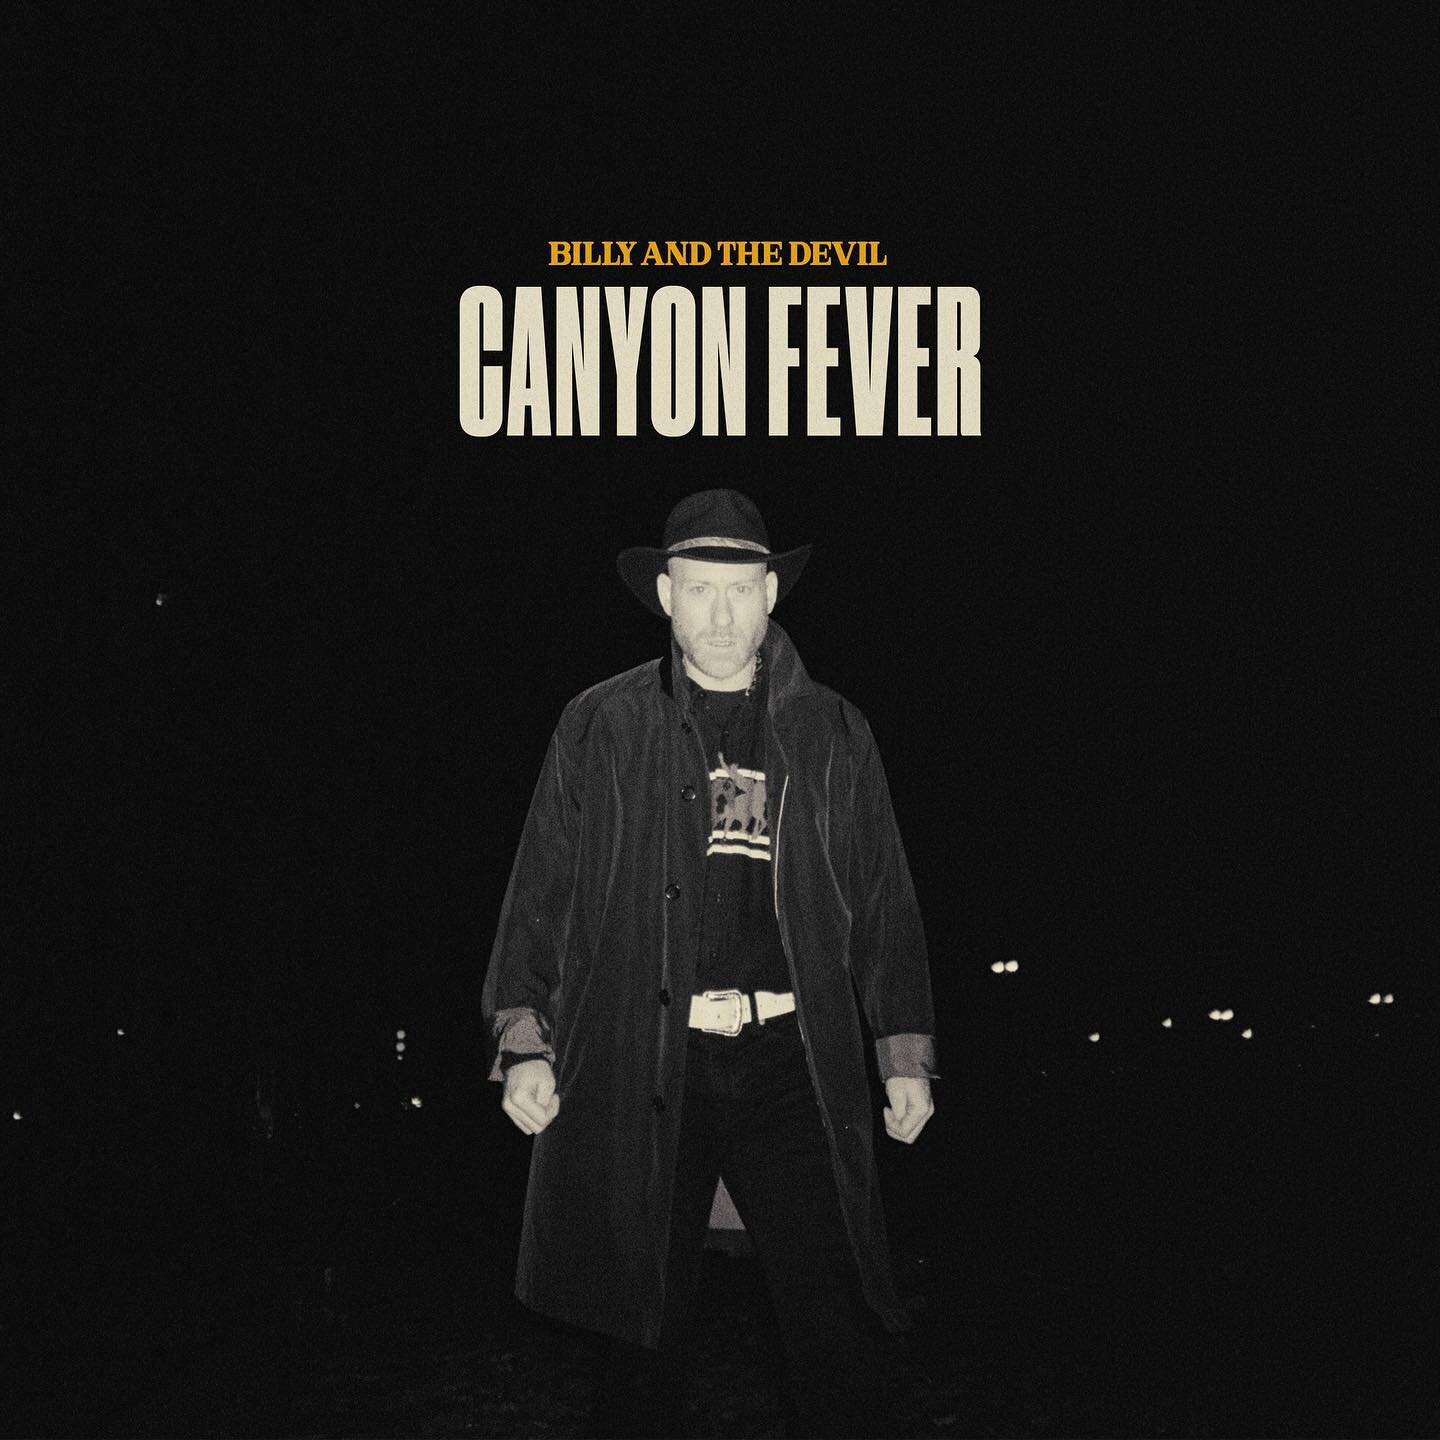 The Canyon Fever EP is now out led by the new single Line in the Dirt. 

This has been a long rewarding journey and I&rsquo;ve been blessed to work with an incredible team. I&rsquo;d like to take a moment to thank and acknowledge them. 

All the song